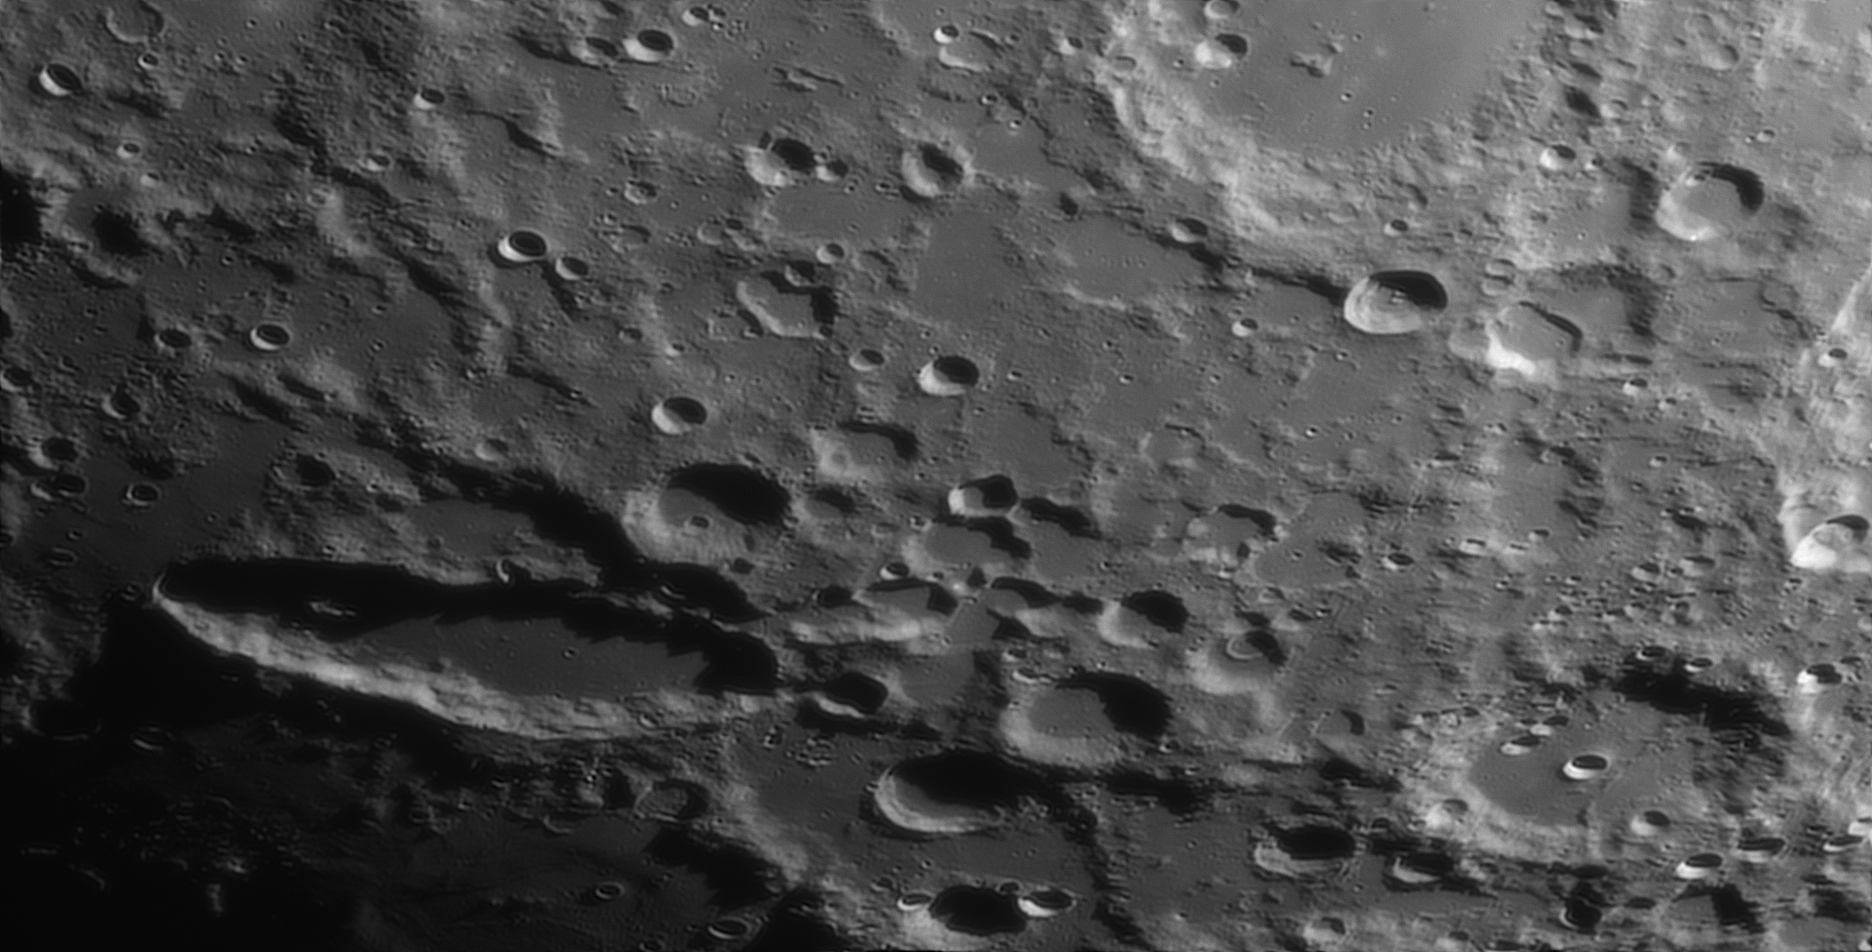 2021-03-24-2007_1-IR-Moon_lapl5_ap100_AS_schiller.png.988366749d604da5b5f6a562d32b59a8.png